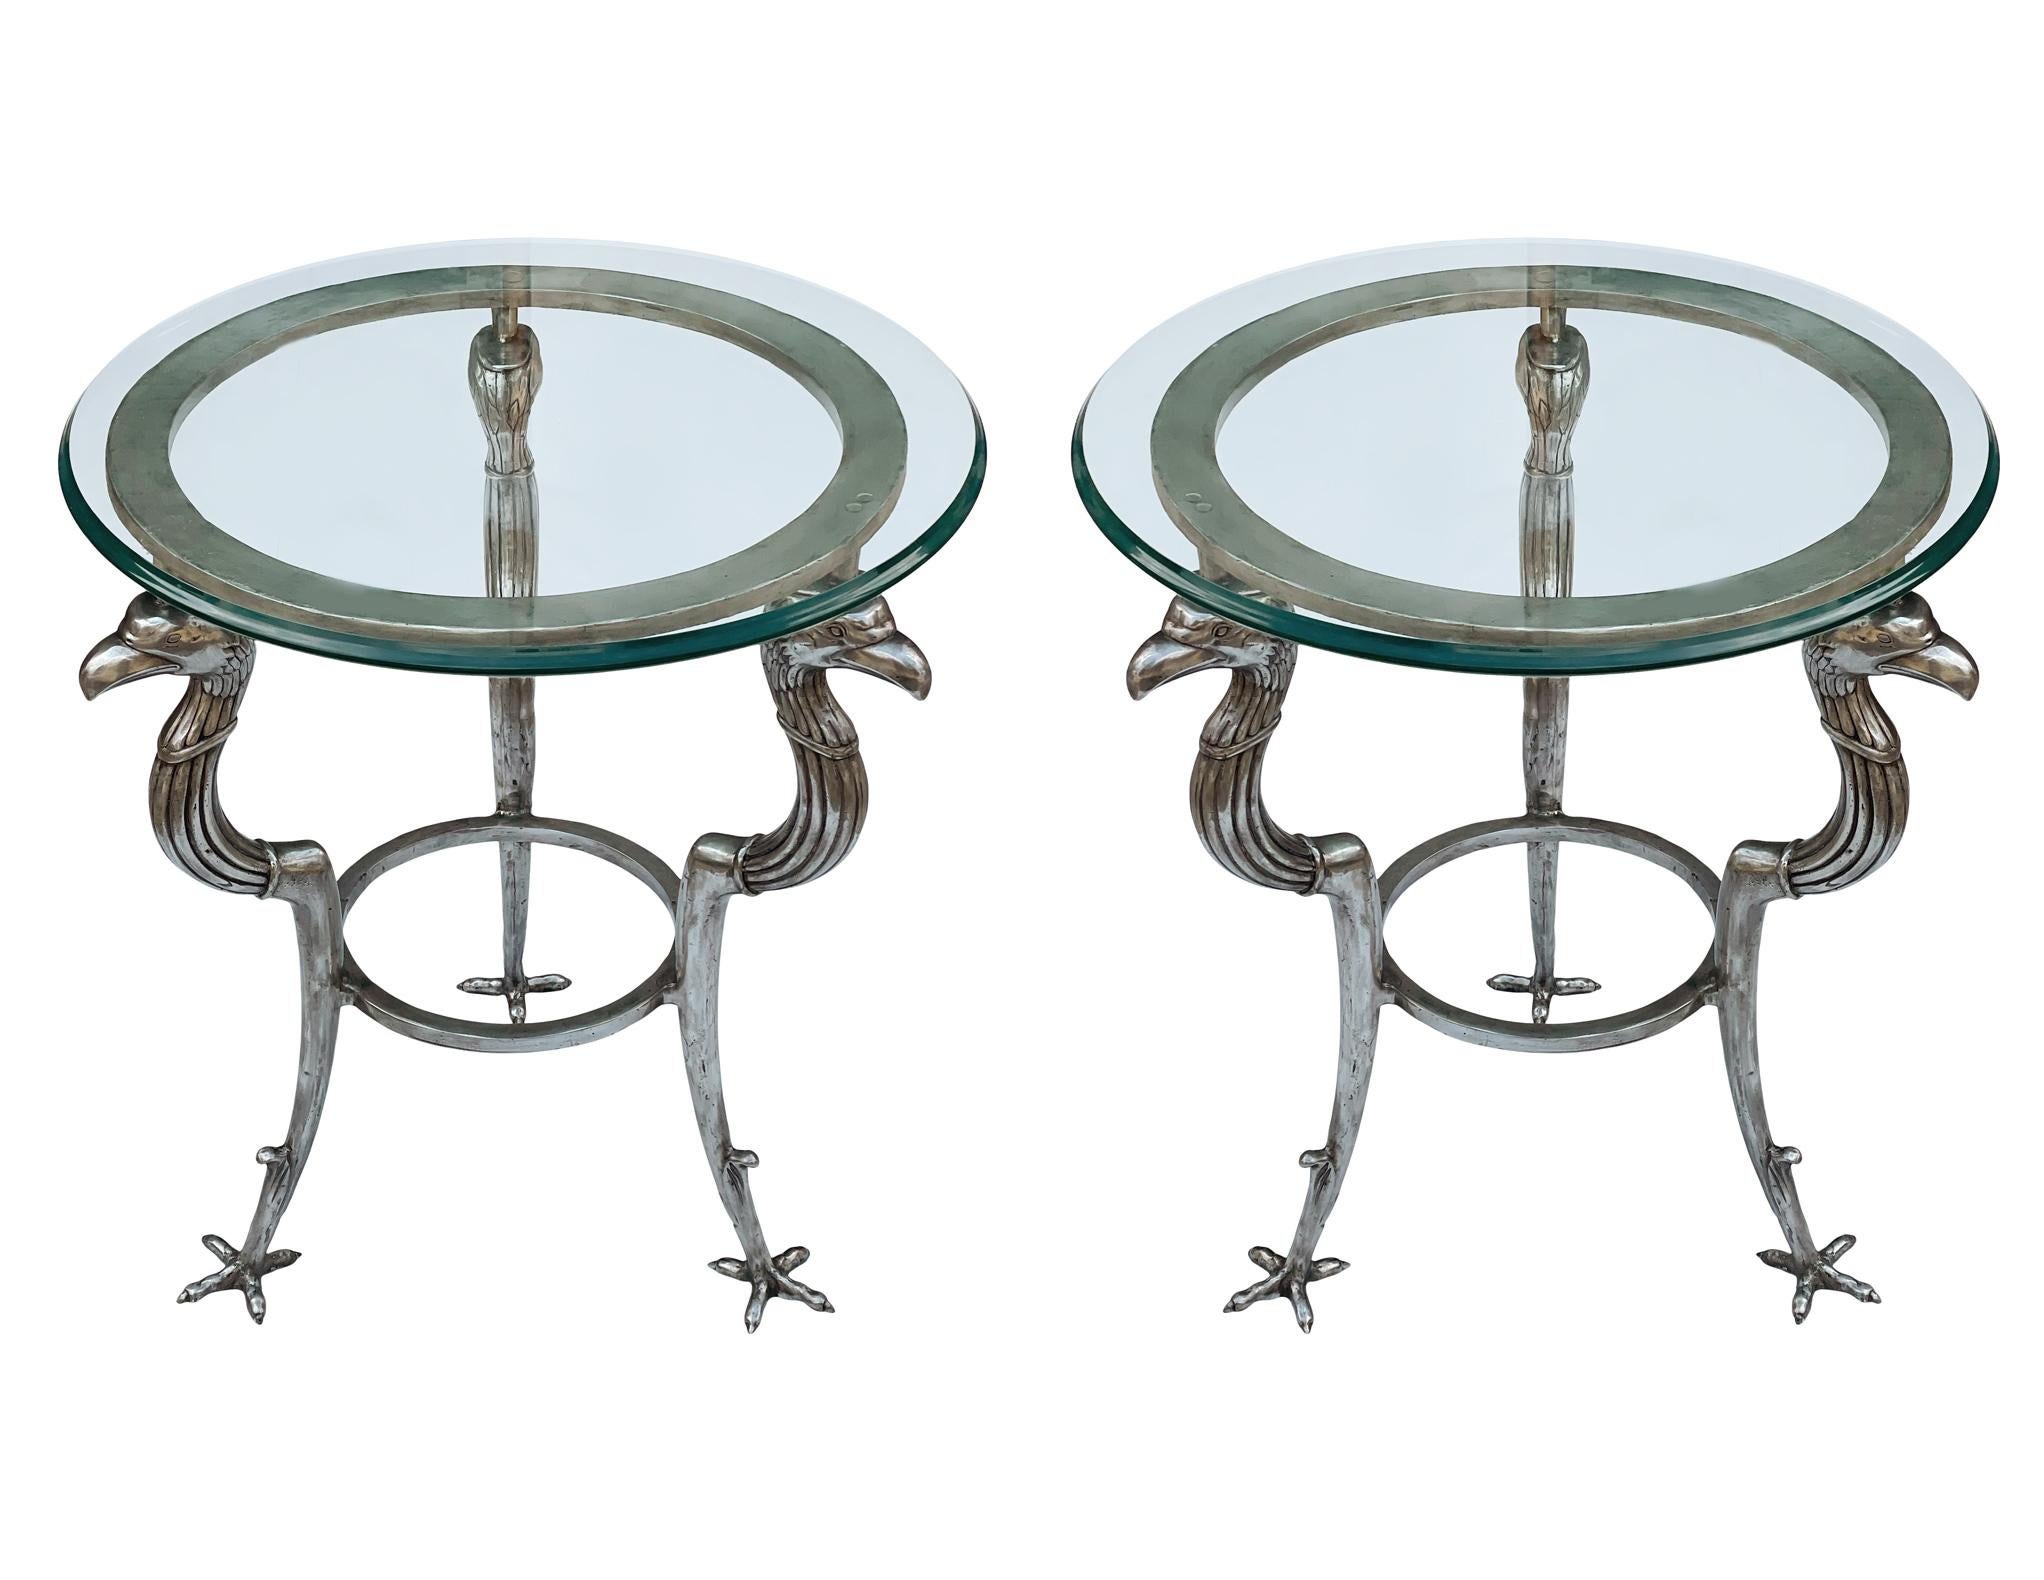 Matching Pair of Hollywood Regency Glass & Steel End Tables by Maitland Smith For Sale 3